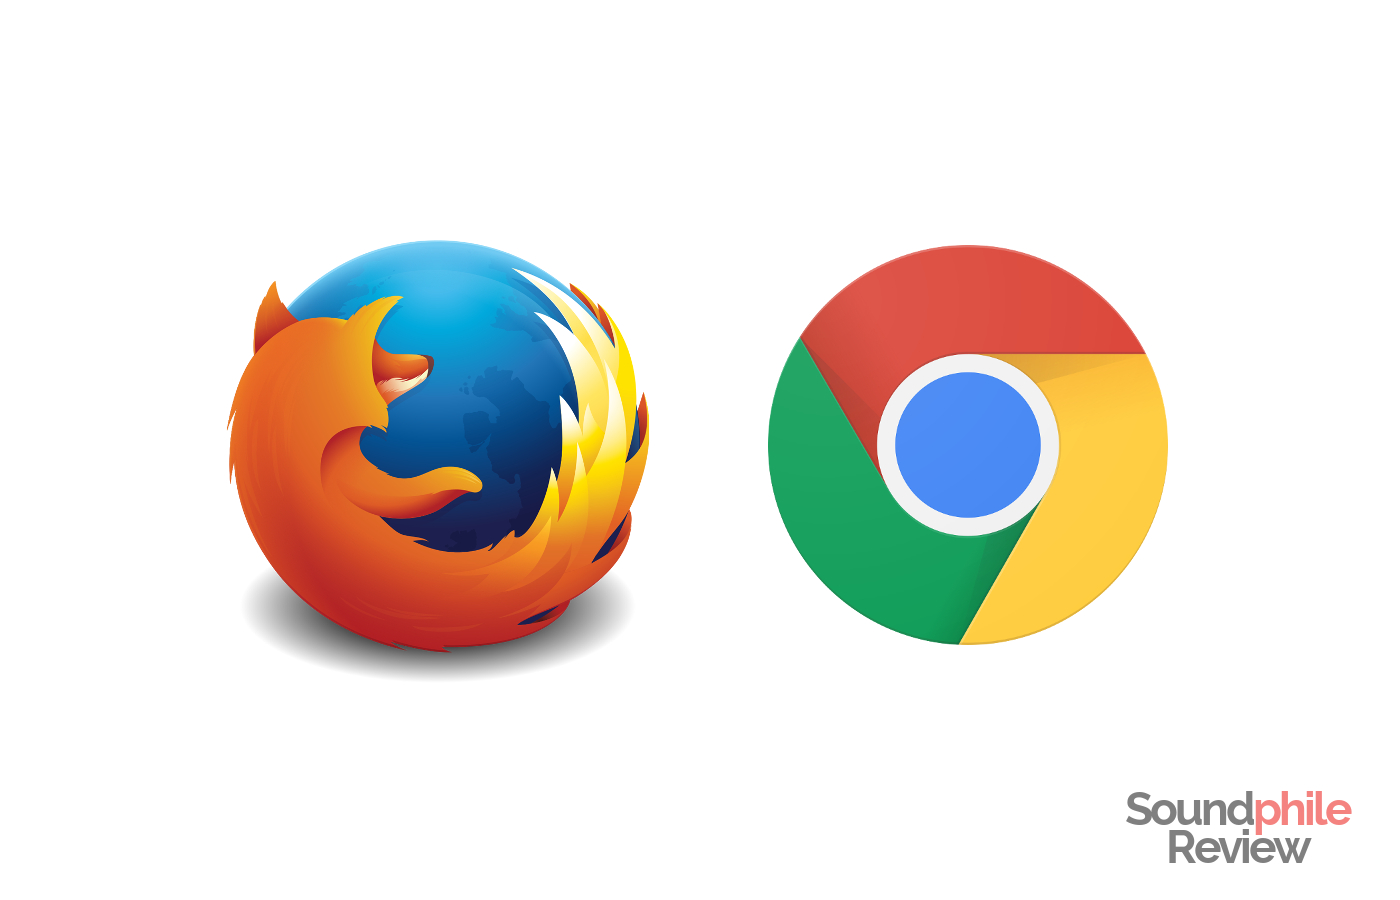 Mozilla Firefox 51 and Google Chrome 56 support FLAC